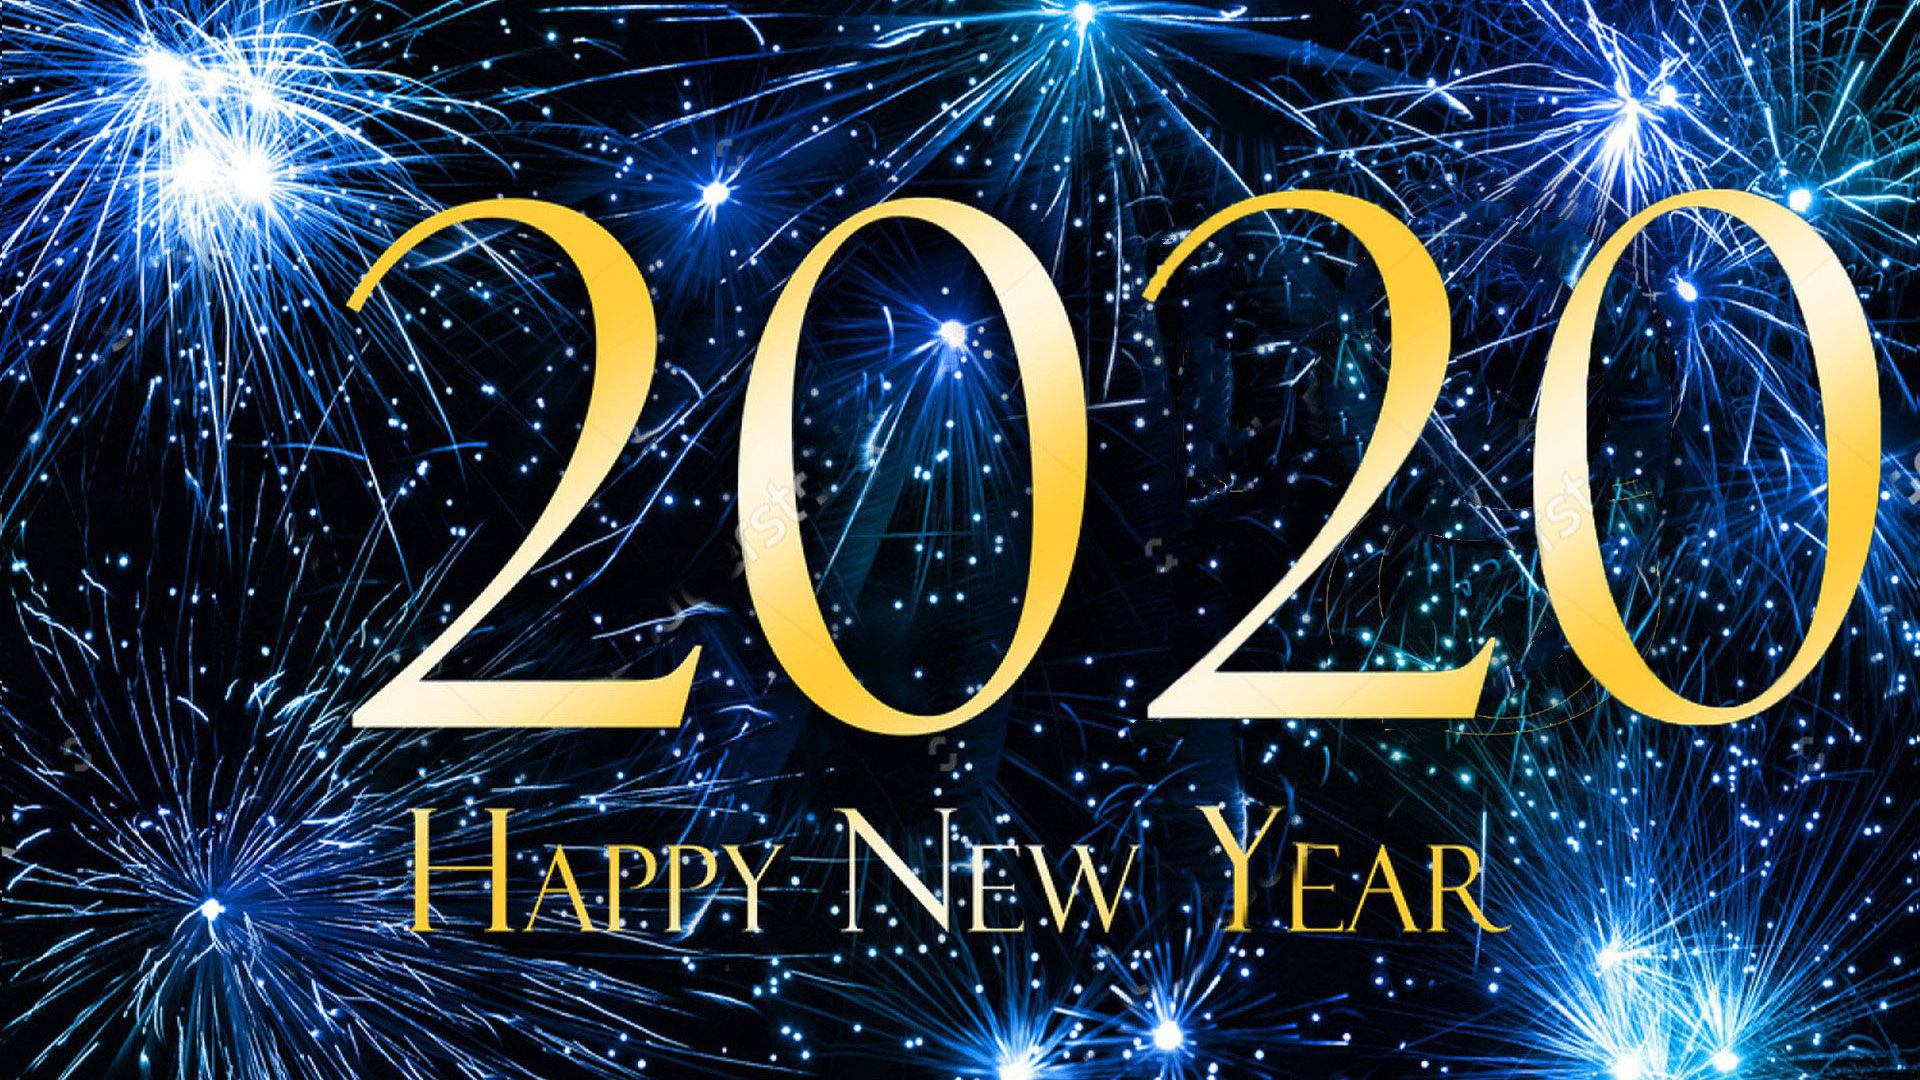 happy new year wallpaper,new year,fireworks,new years day,text,holiday